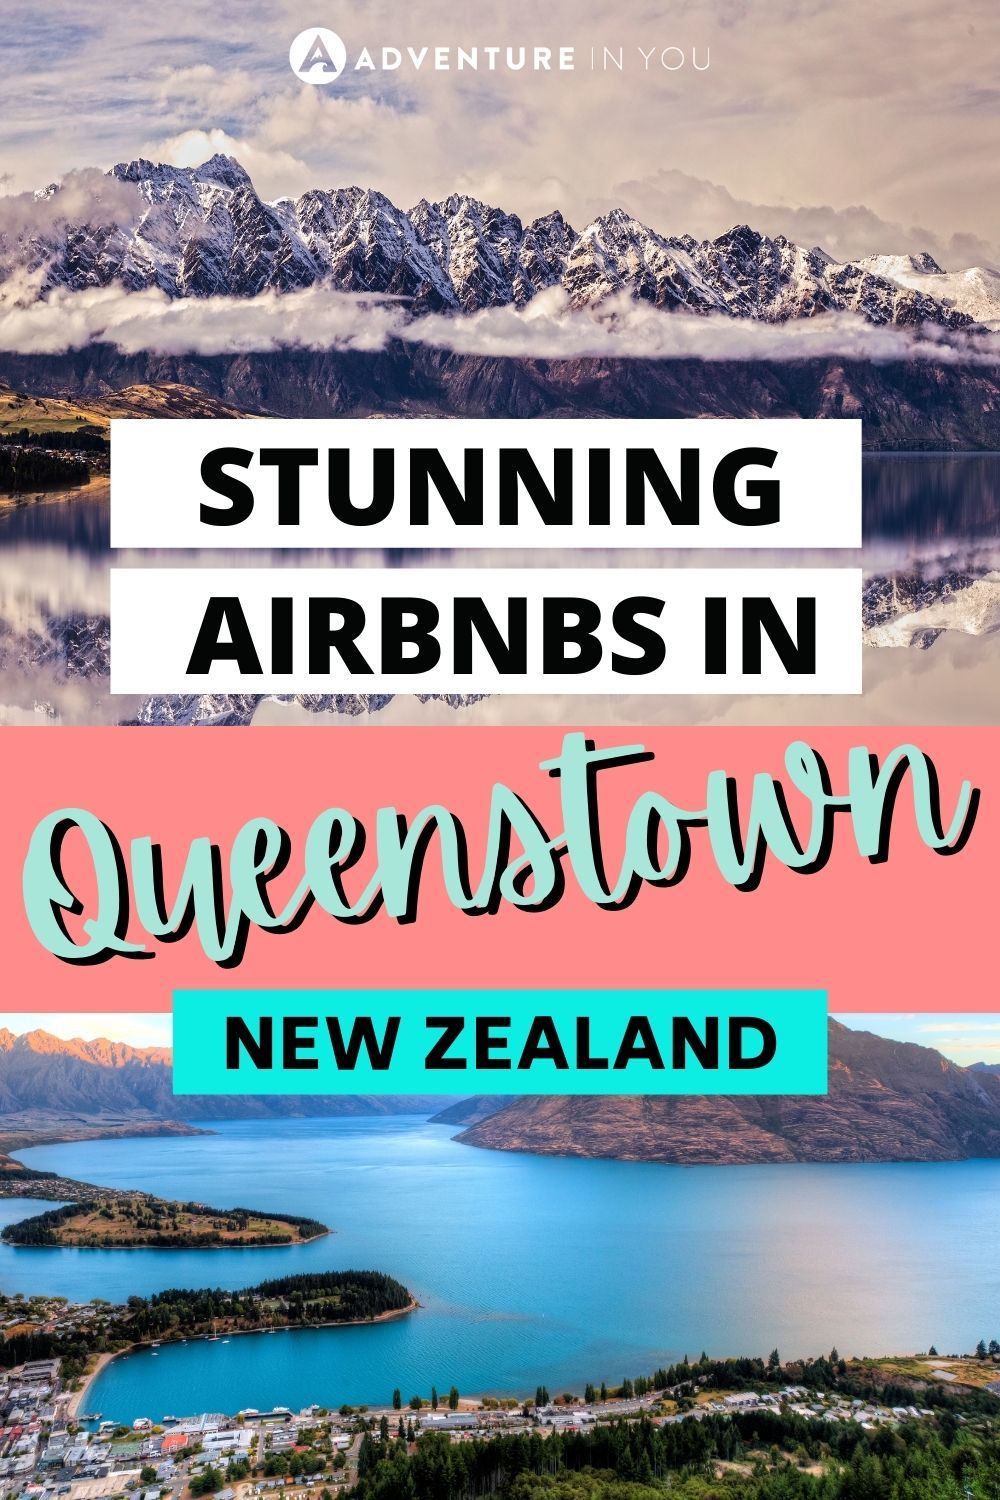 Airbnbs in Queenstown | Looking for the best Airbnbs in Queenstown Click here to see our top picks. #newzealand #queenstown #wheretostayinqueenstown